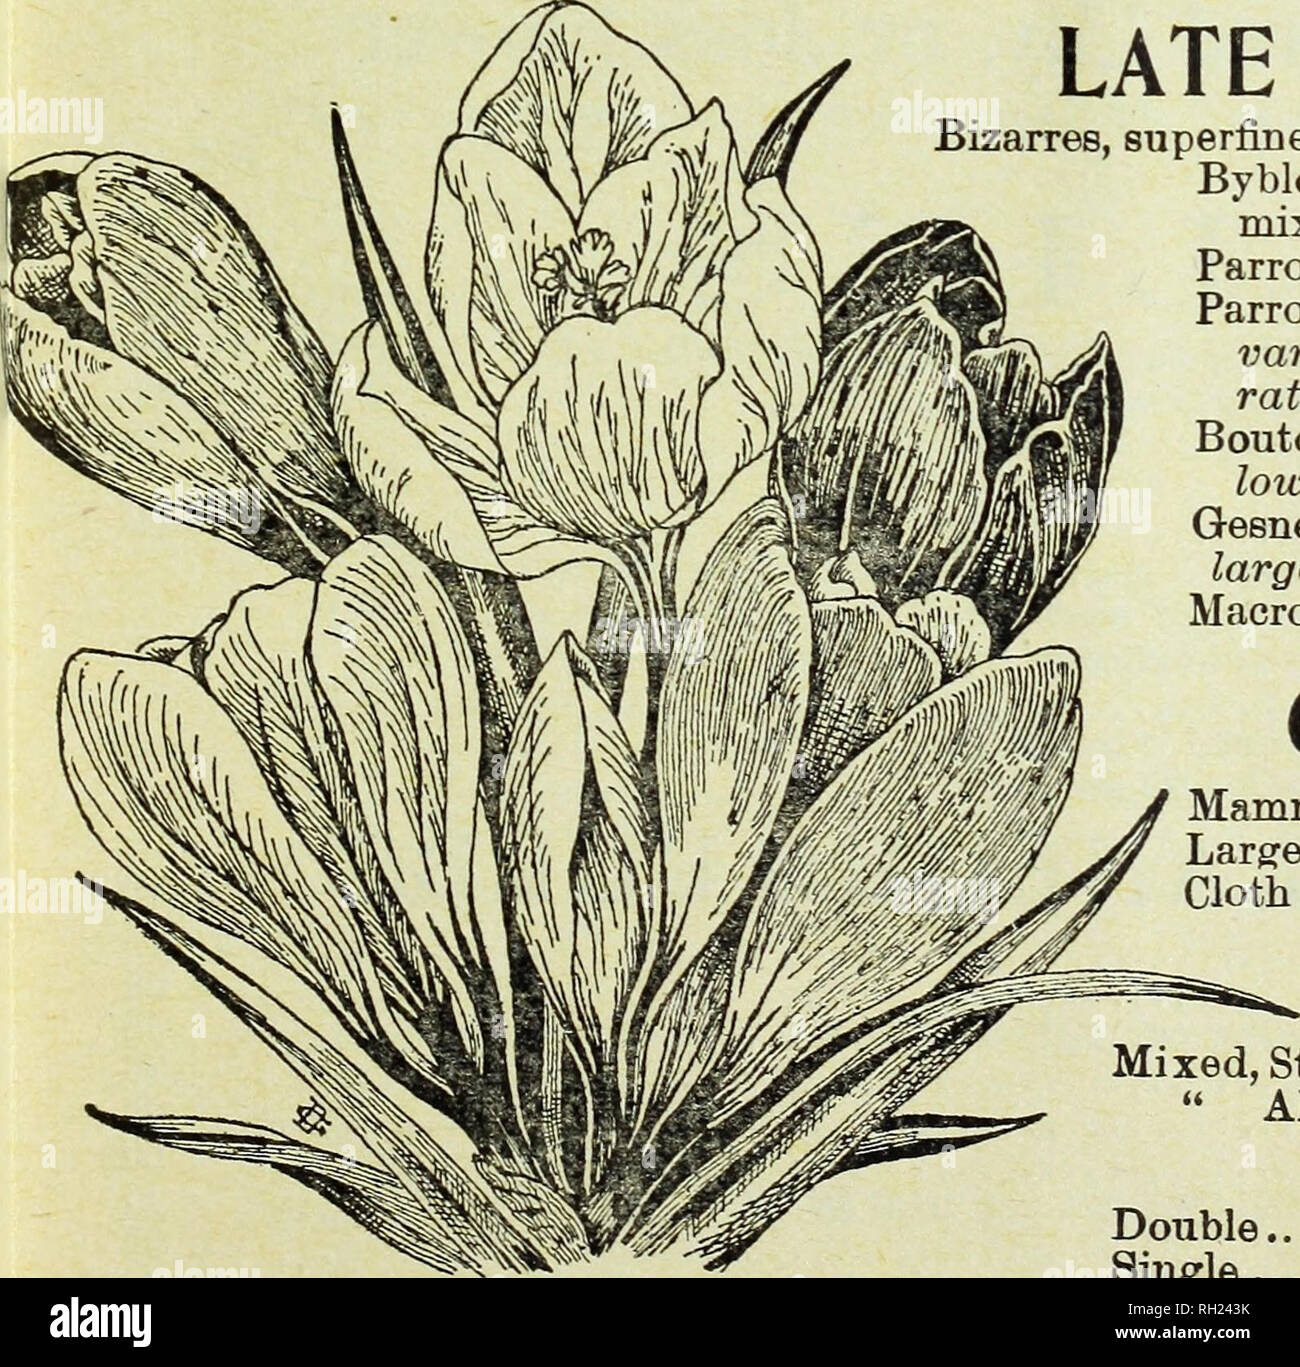 . Bulbs and seeds : autumn 1905. Seeds Catalogs; Bulbs (Plants) Catalogs; Vegetables Seeds Catalogs. D. M. FfeRRY &amp; CO'6 1005 TRADE UST OF BULBS. SINGLE EARLY TULIPS. SUITABLE FOR FORCING OR GROWING IN THE GARDEN. WHITE. Per 100 Per 1000 Due van Thol, White 81 75 Pottebakker, White 1 50 $ 12 00 White Swan, (new) 1 25 10 GO WHITE AND ROSE OR RED. La Keine 80 6 50 Rose Gris de Lin 1 25 Couleur Ponceau 80 6 50 Joost van Vondel 1 25 11 00 ORANGE OR YELLOW. Canary Bh-d 1 25 10 00 Due van Thol, Yellow 2 00 Yellow Prmce 1 00 9 00 Pottebakker, pure yellow 1 50 12 00 Chrysolora 1 00 7 50 RED AND OR Stock Photo